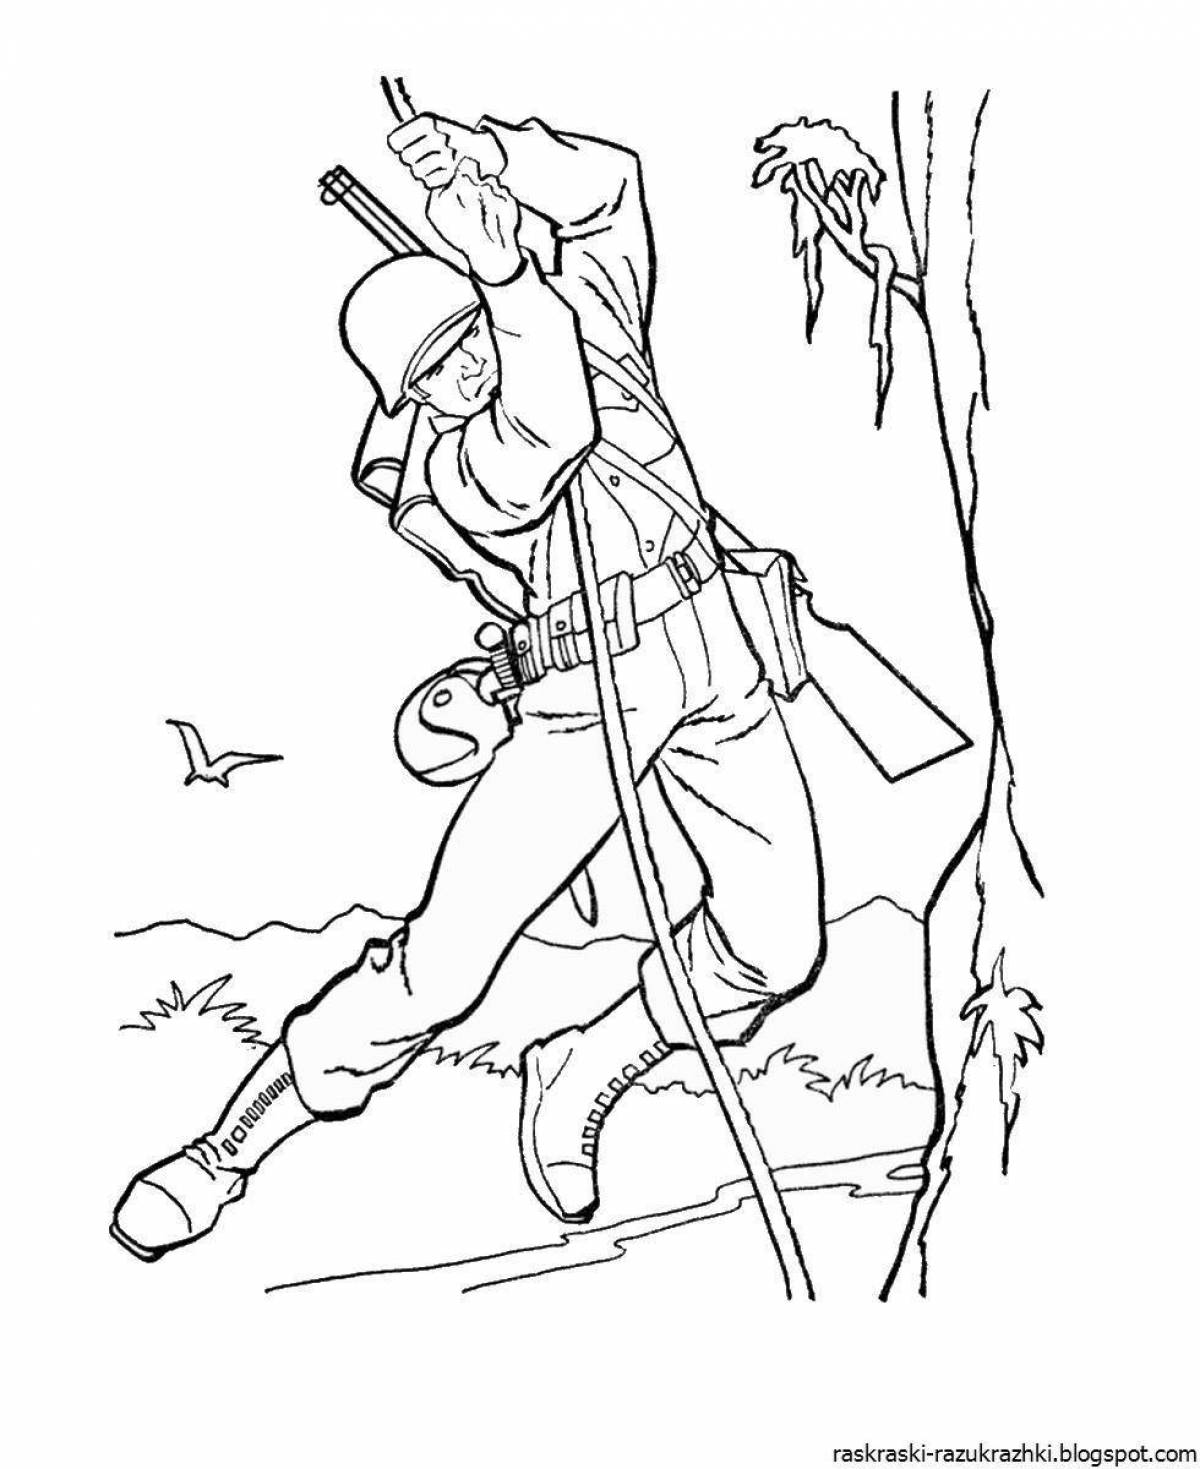 Animated soldier coloring pages for kids